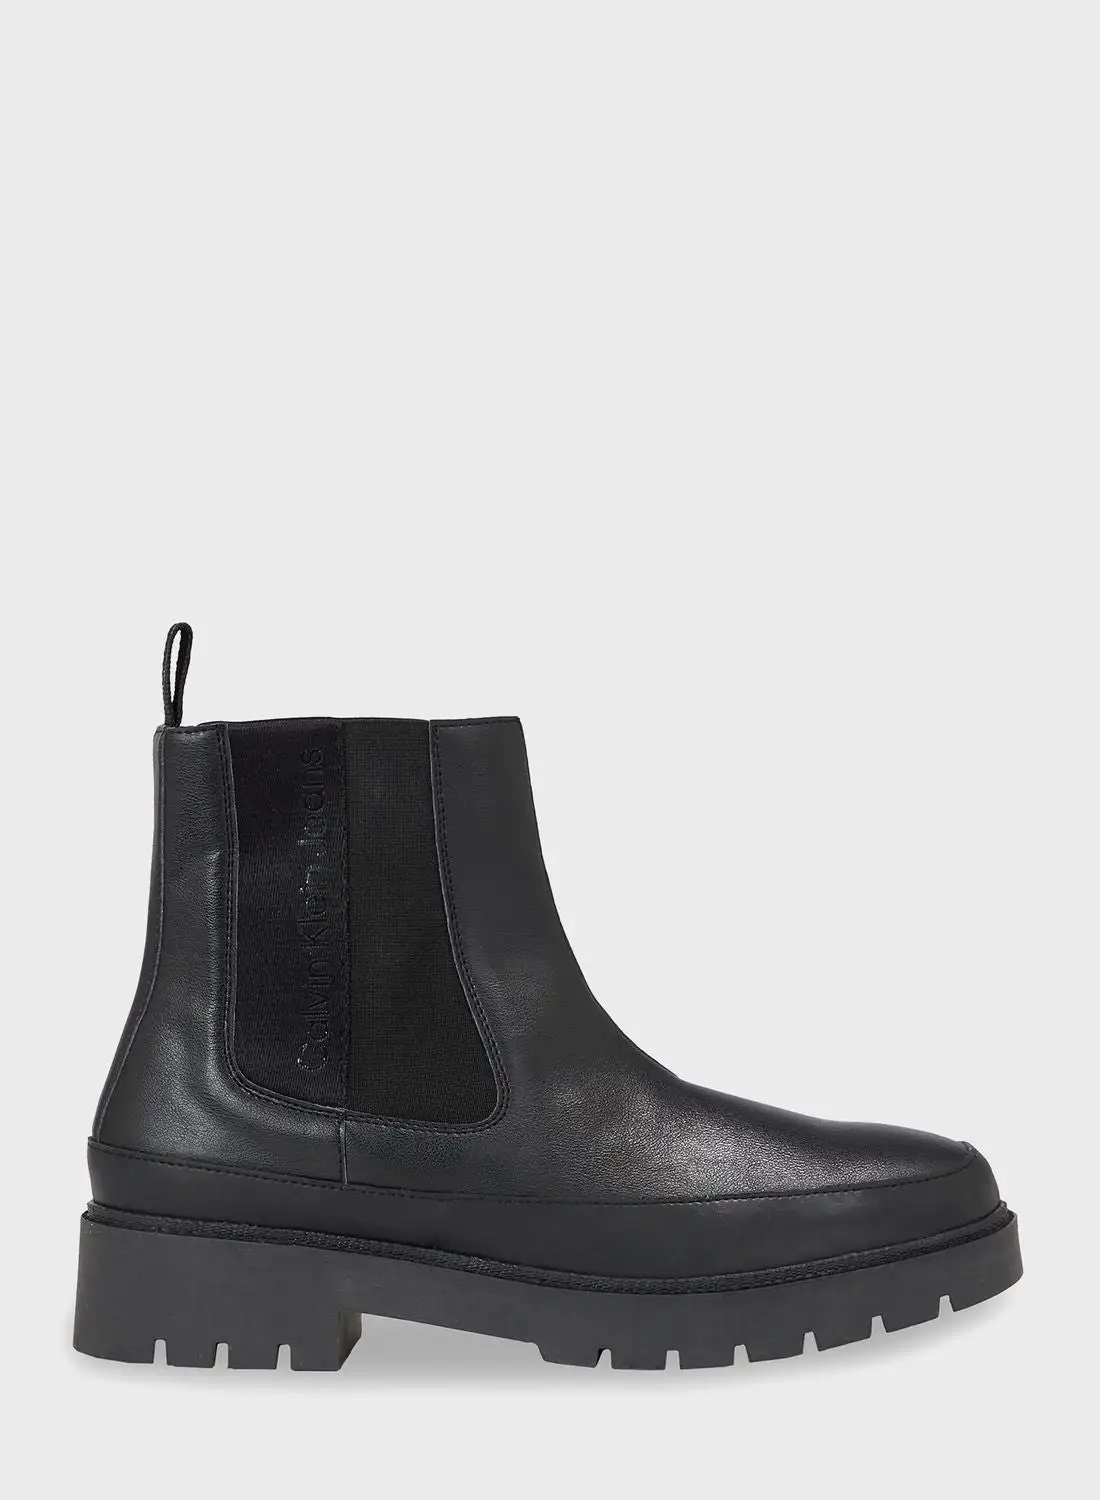 Calvin Klein Jeans Casual Slip On Boots